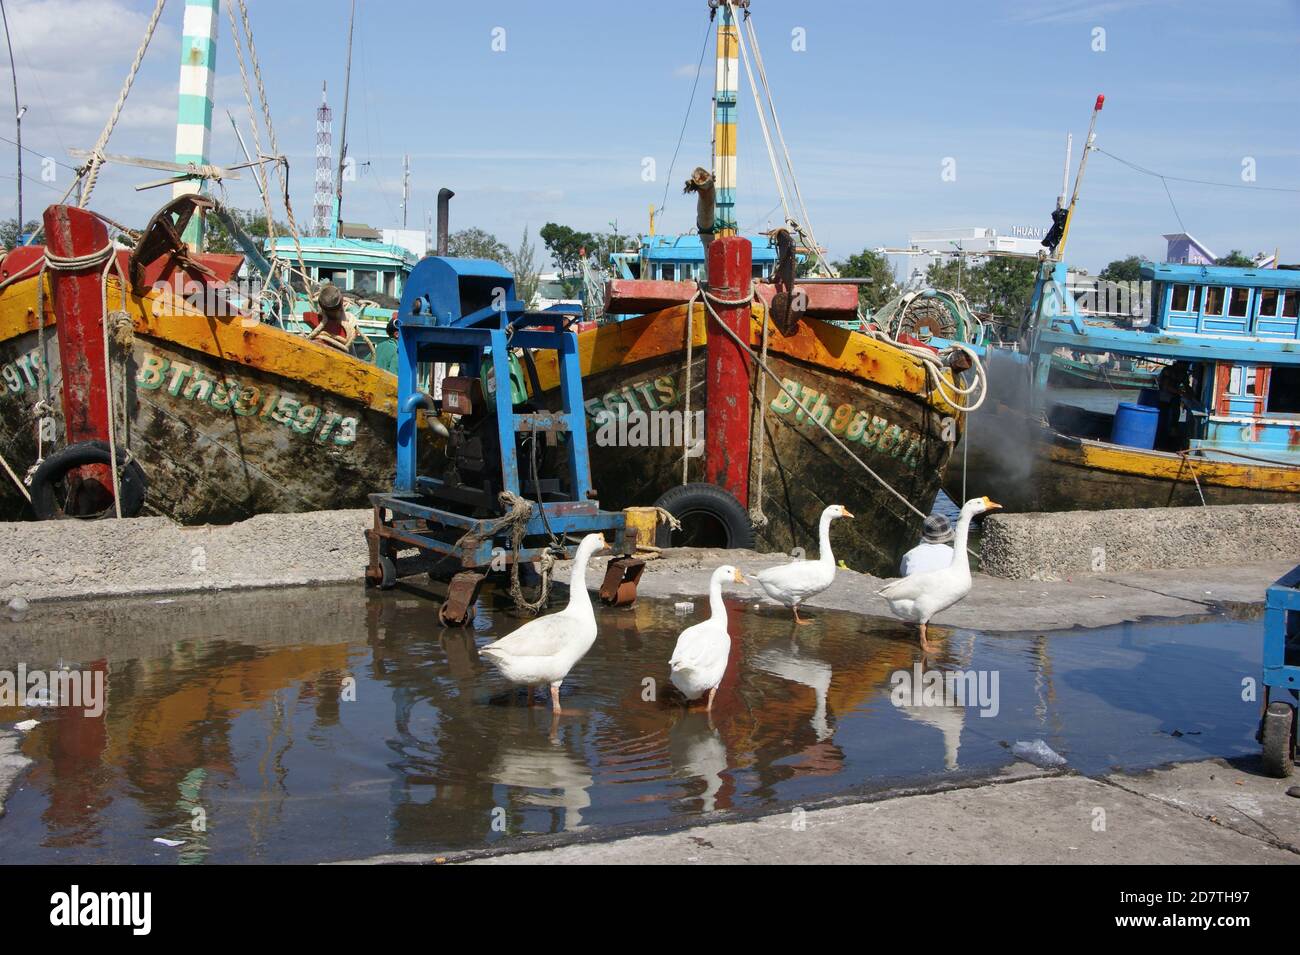 Geece guarding the boats in the vibrant fishing port of Phan Thiet, Vietnam. Stock Photo